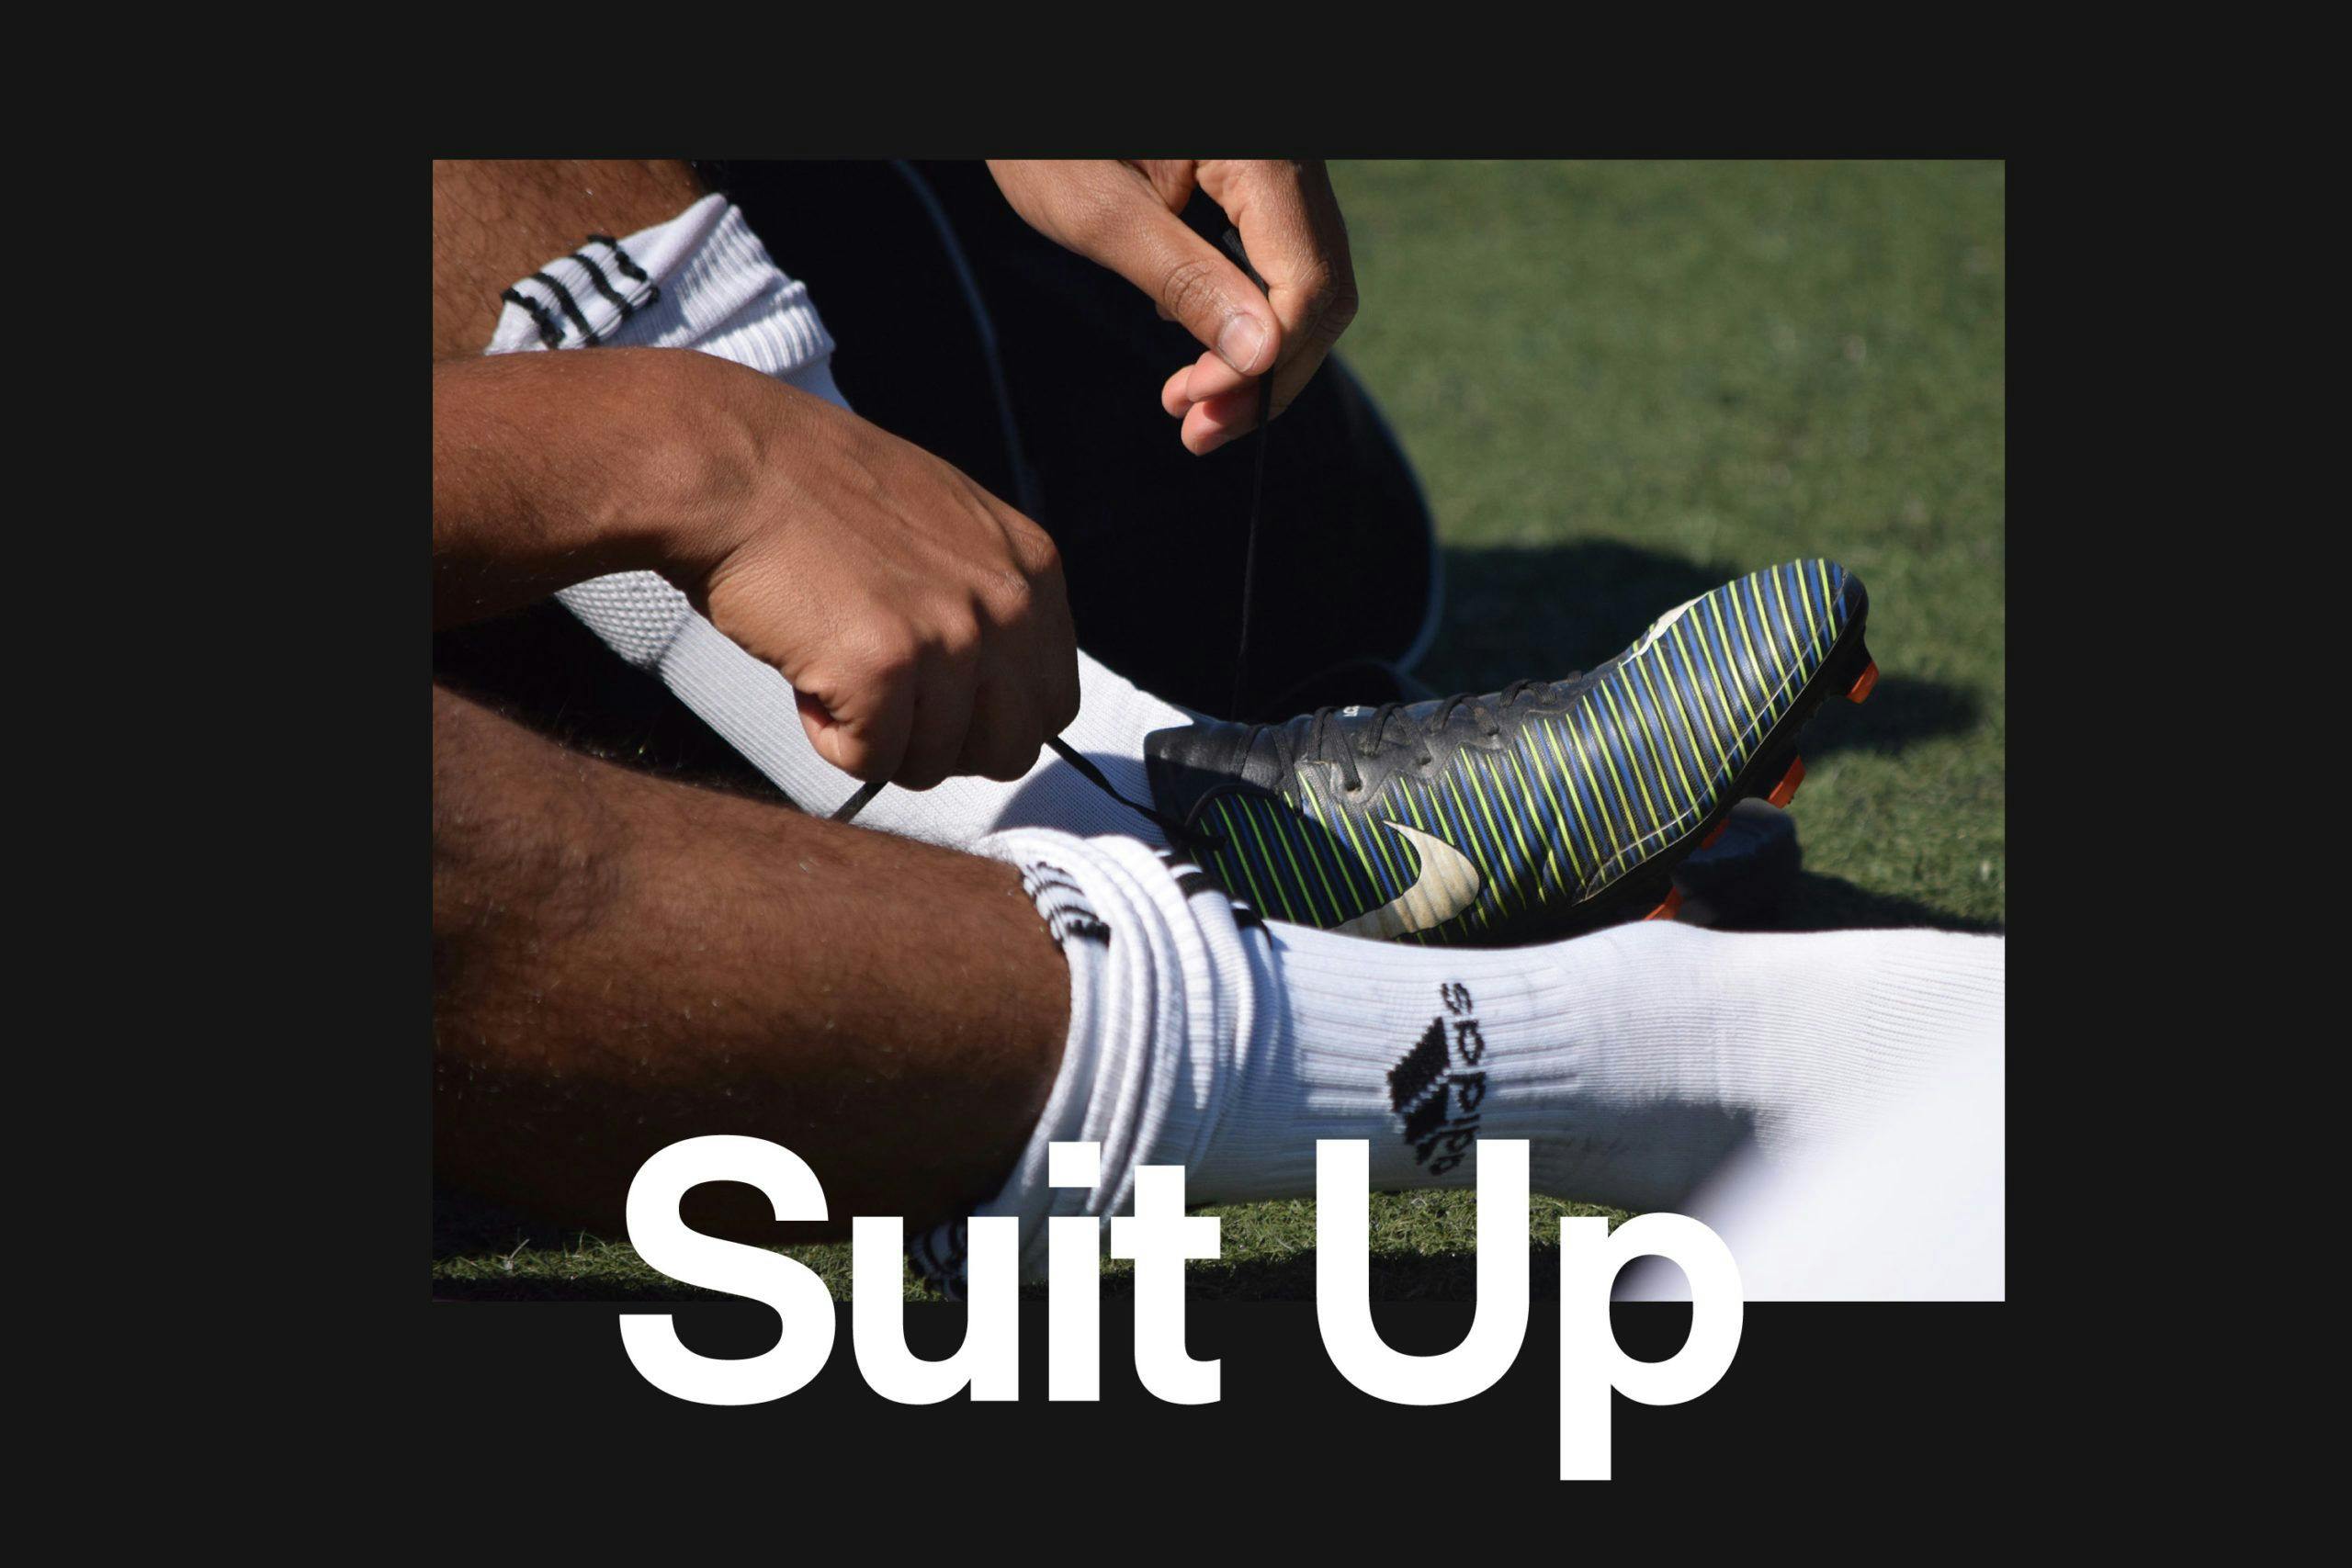 Photo of a track team member lacing their cleats with the words "Suit Up" at the forefront